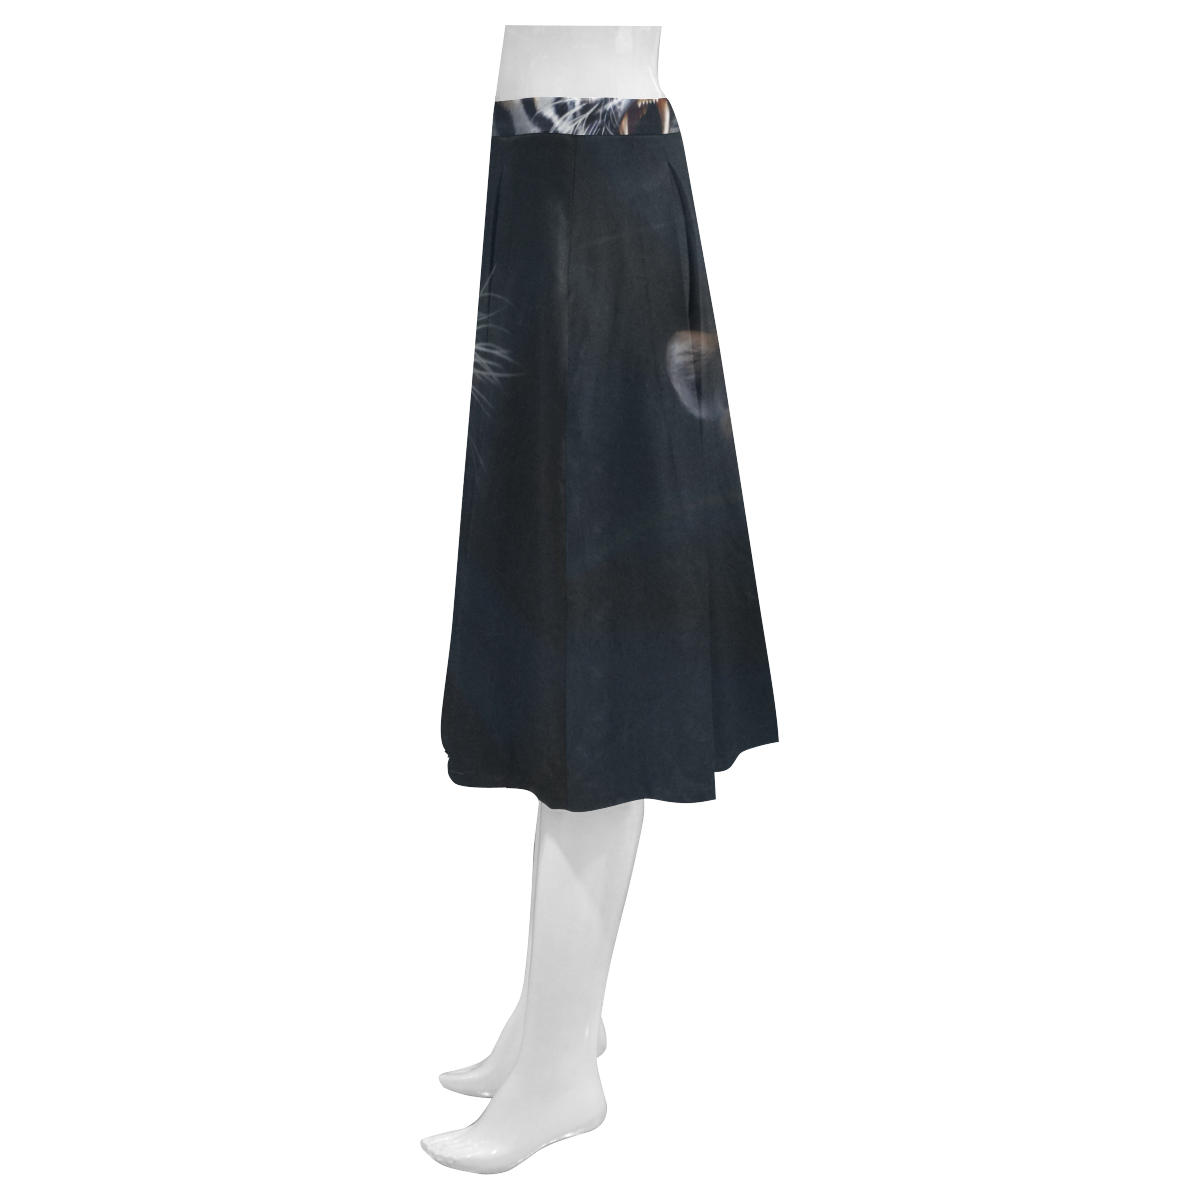 A painted glorious roaring Tiger Portrait Mnemosyne Women's Crepe Skirt (Model D16)